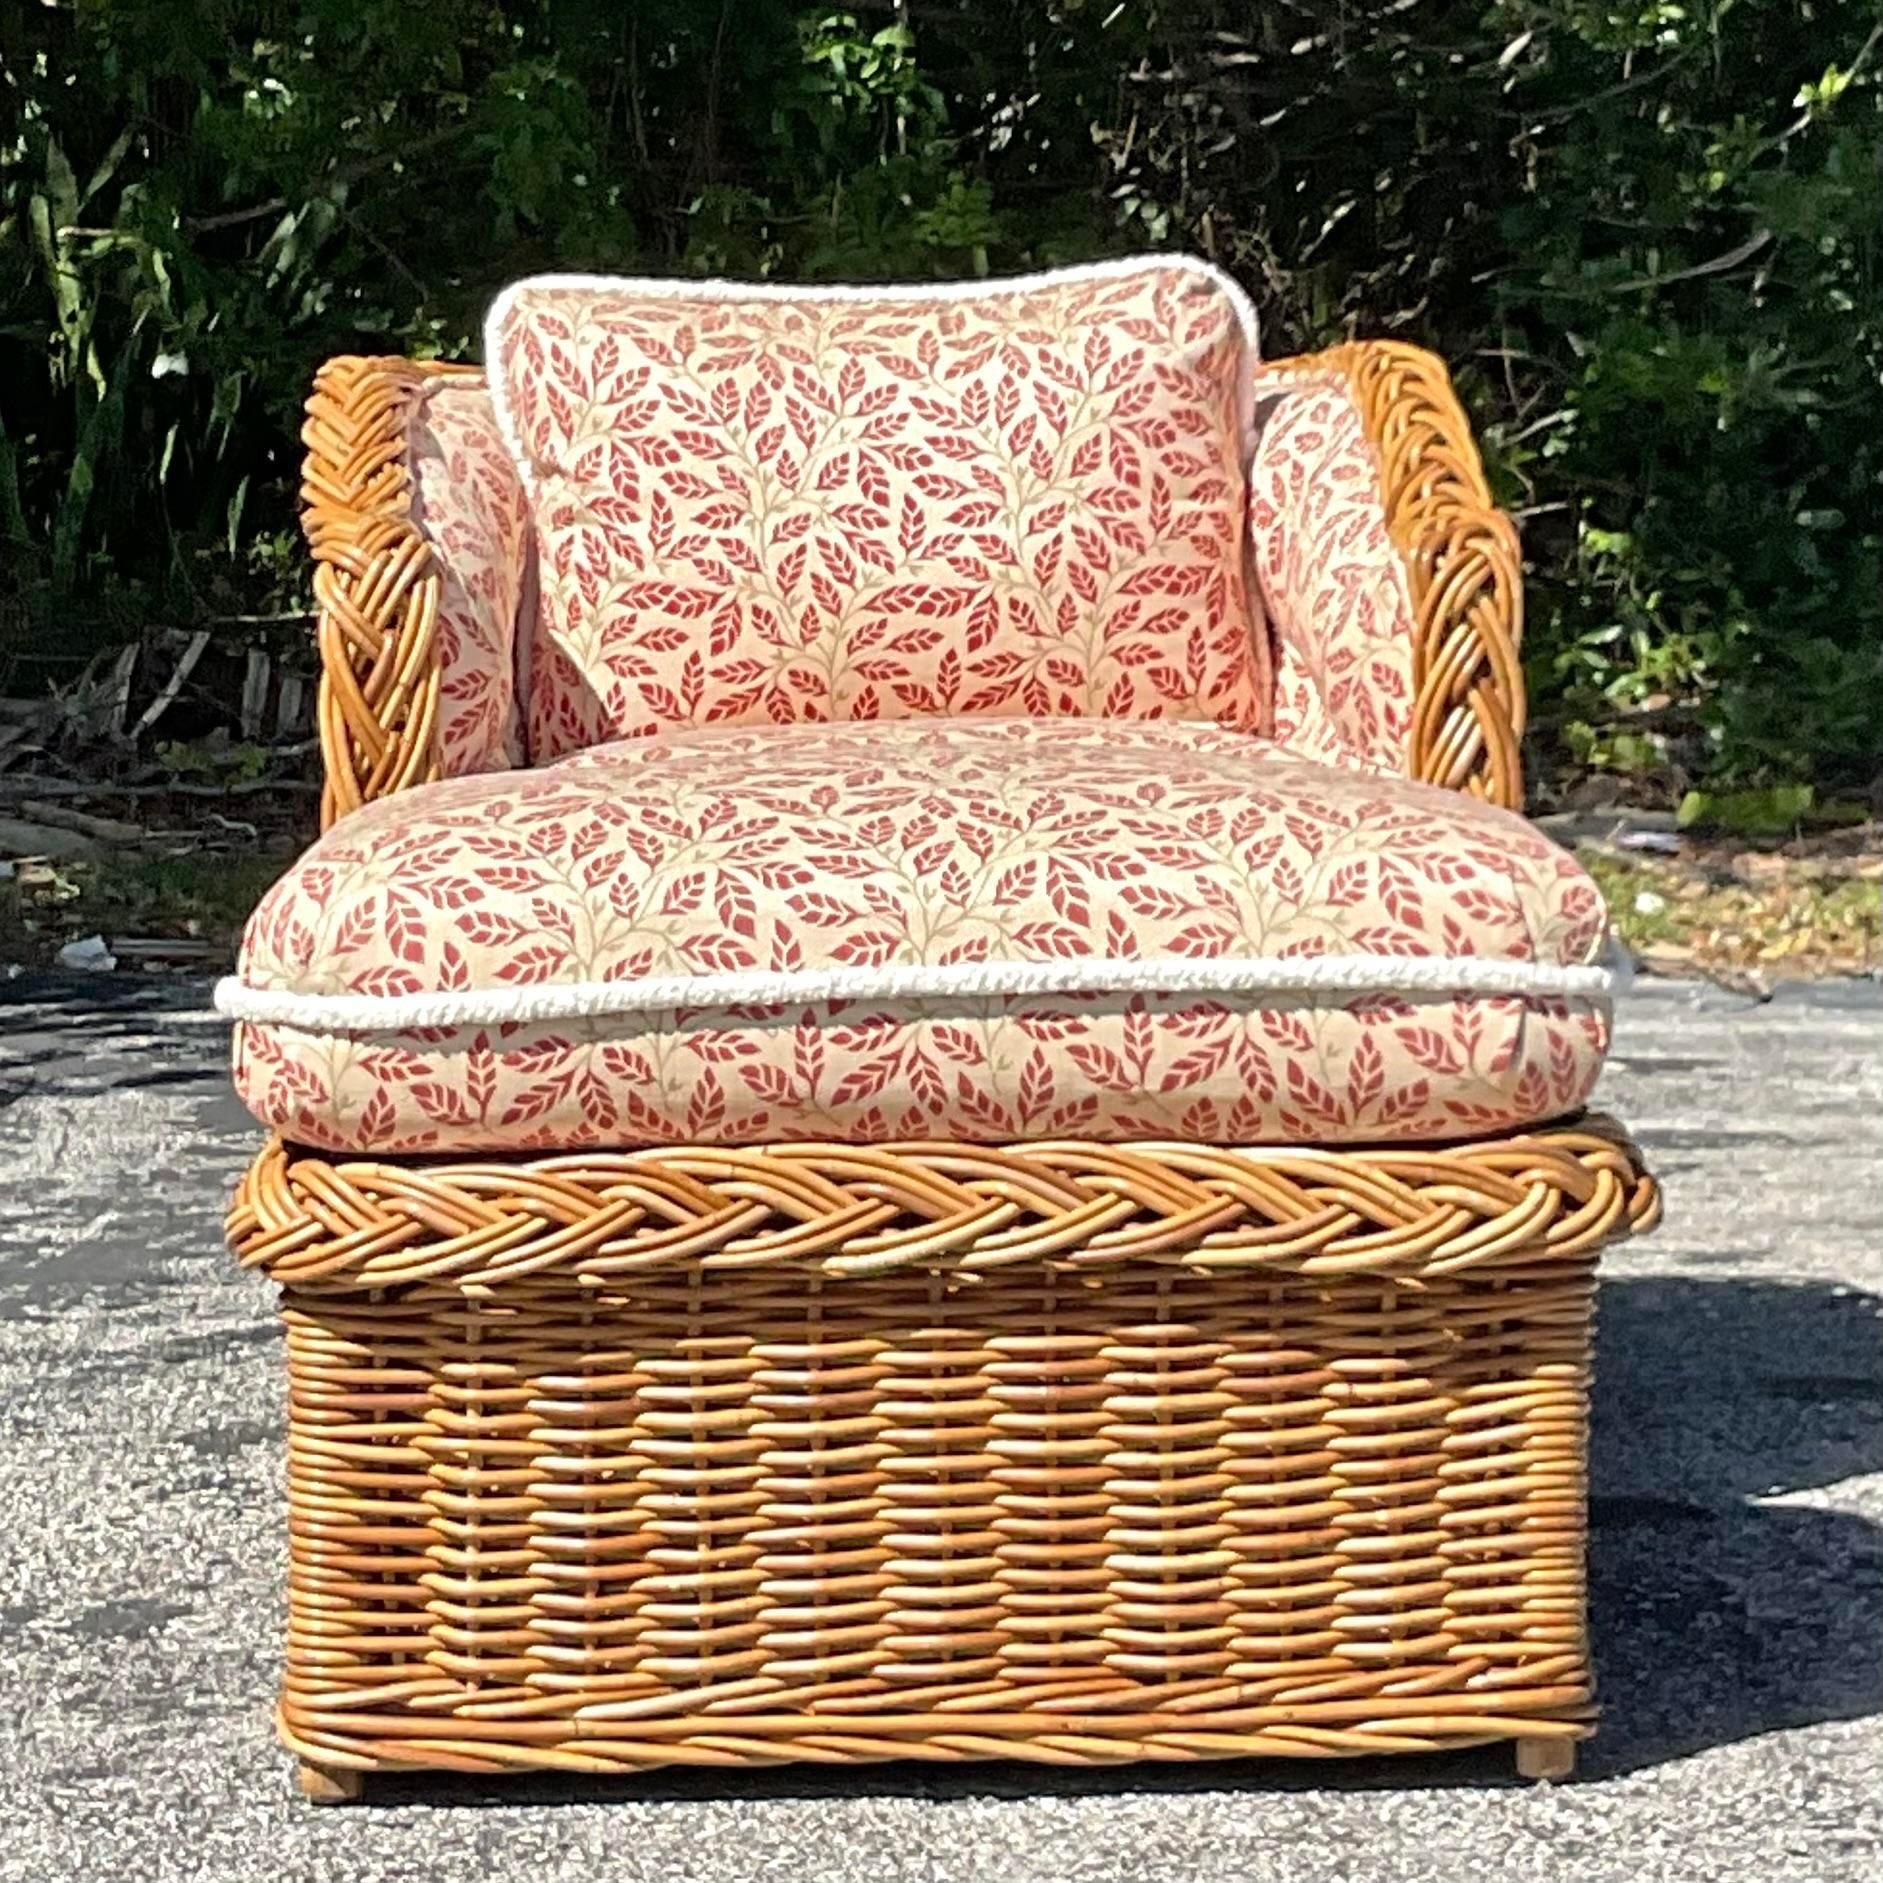 American Vintage Coastal Wicker Works Braided Rattan Lounge Chair and Ottoman